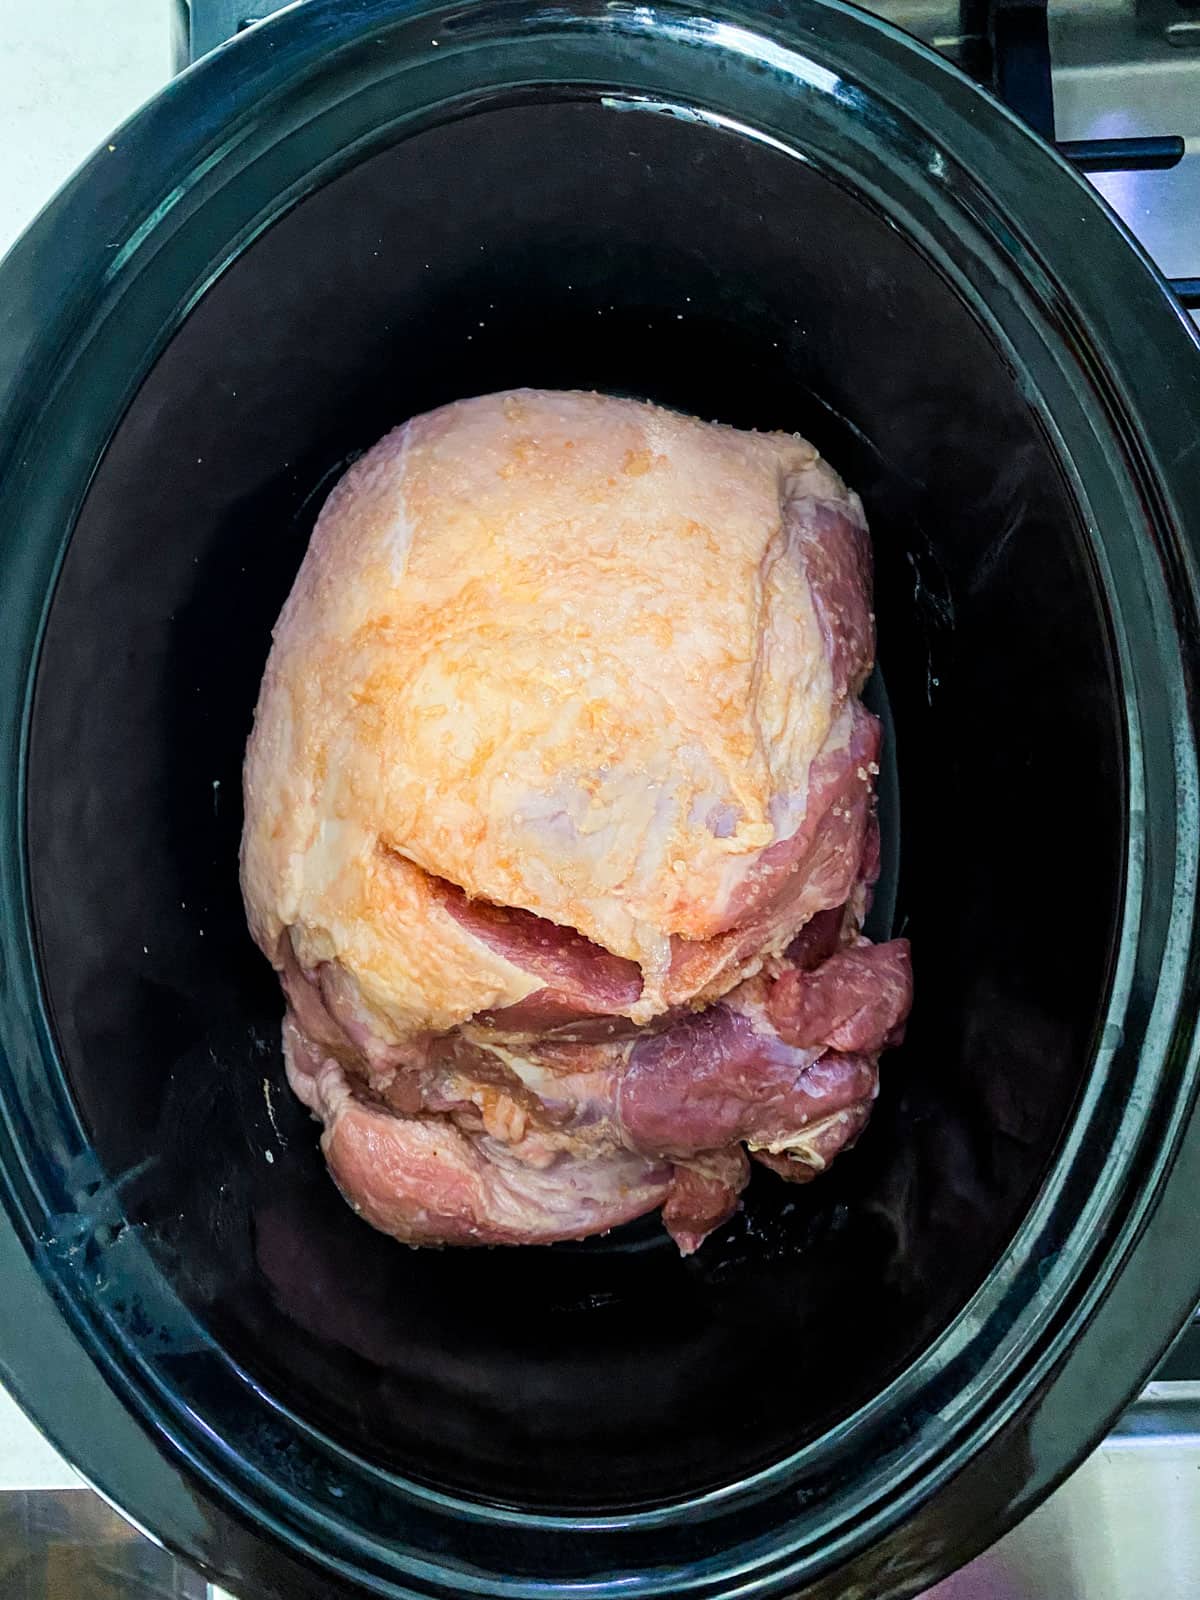 Place the salted pork shoulder in the slow cooker.